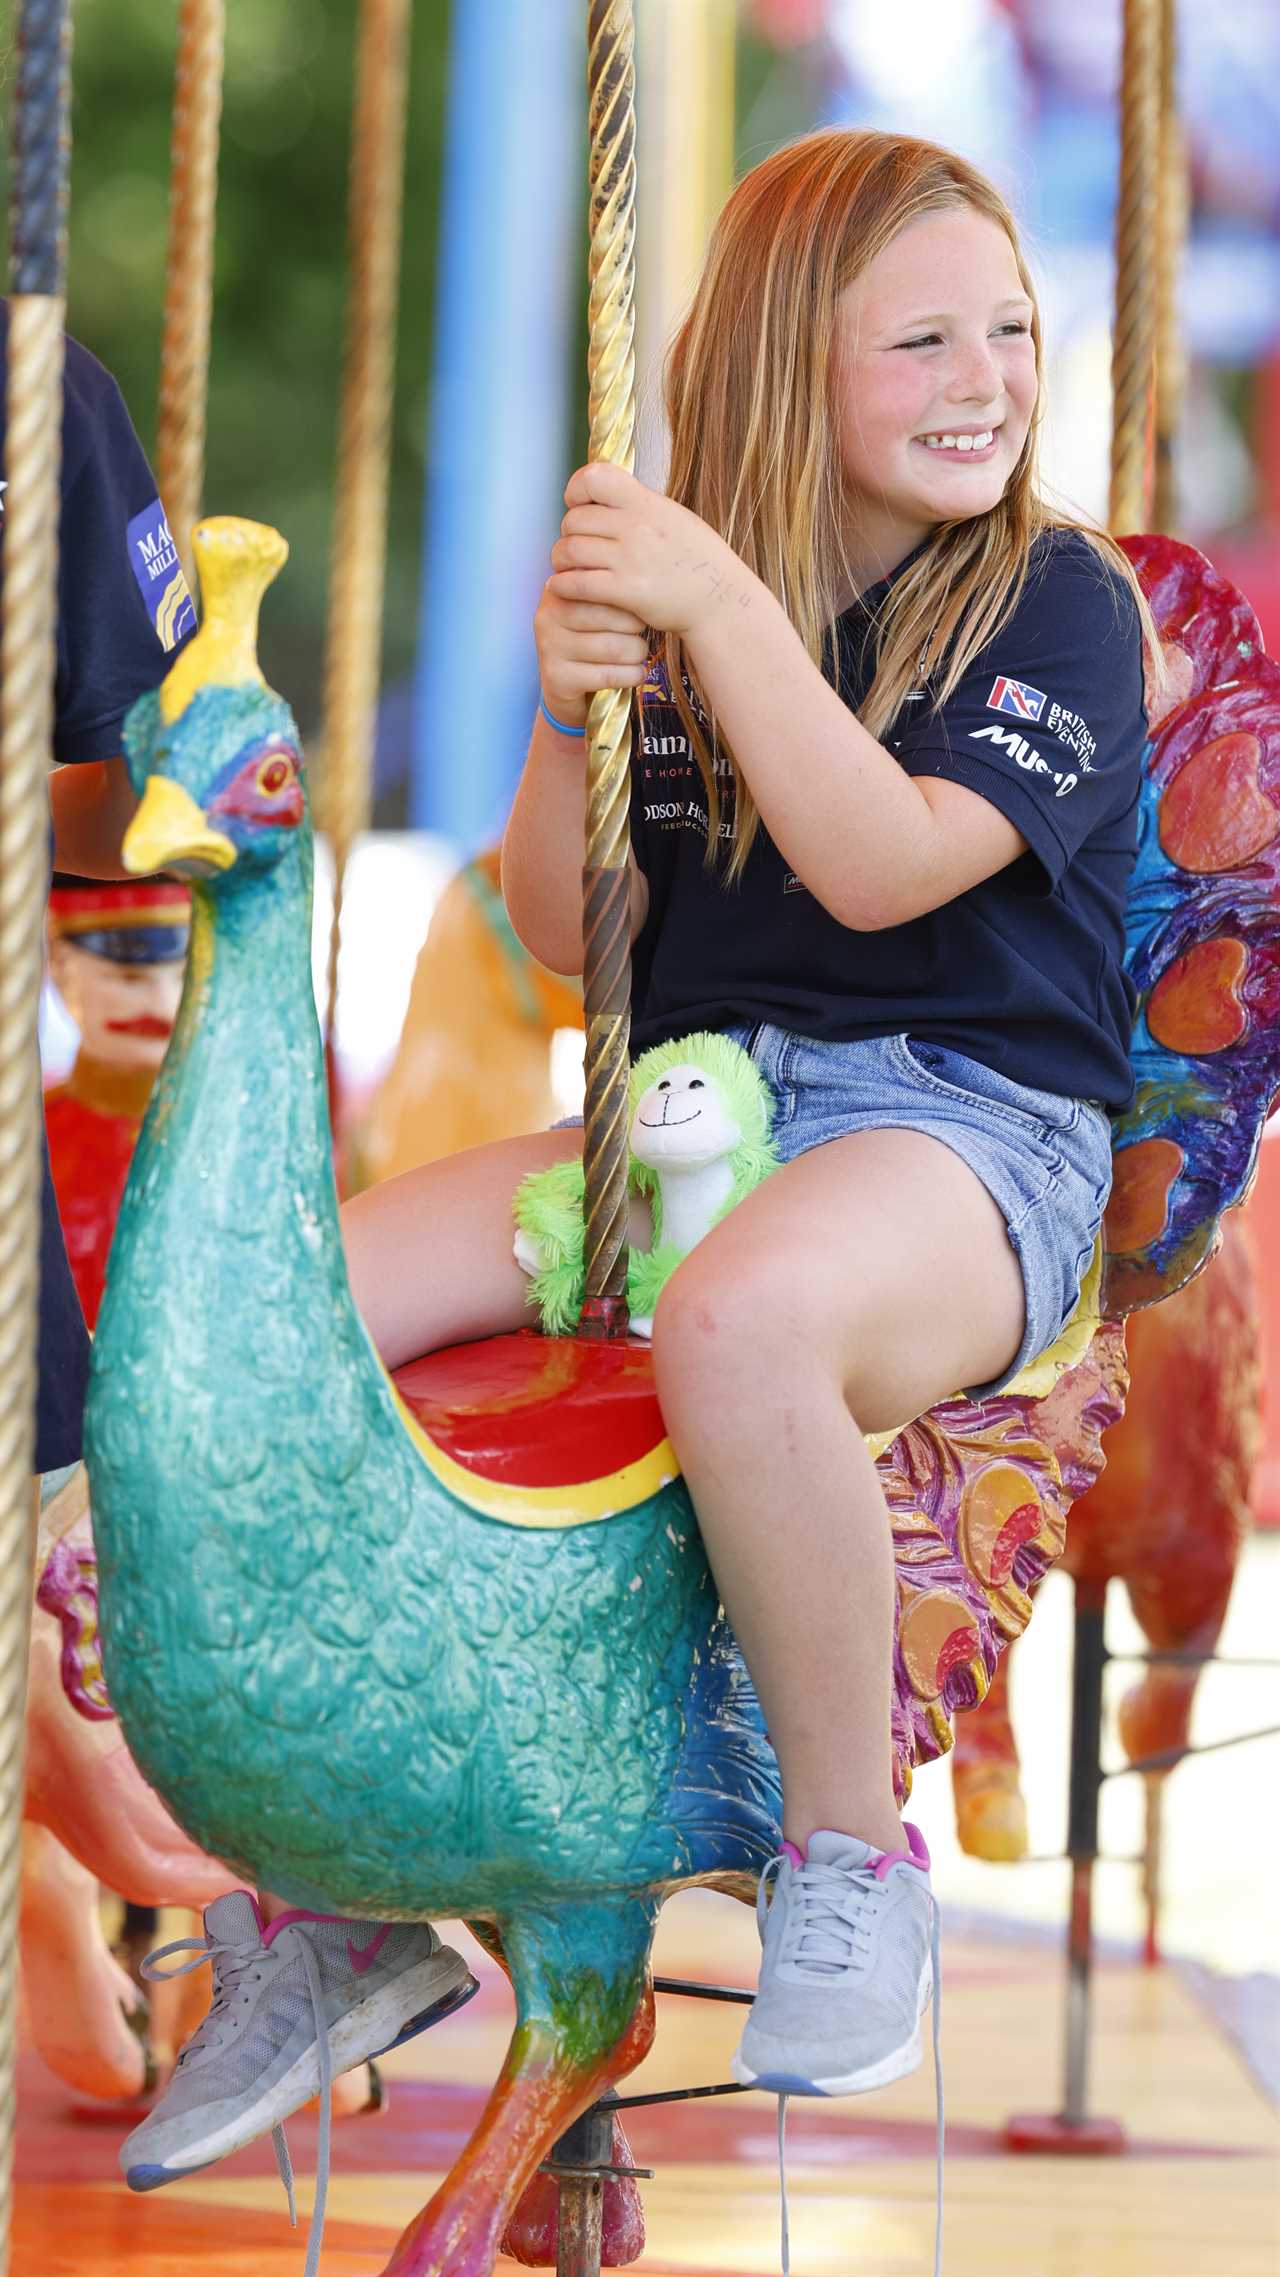 Zara Tindall’s daughter Mia looks like she’s following in her equestrian footsteps as she jumps on a carousel